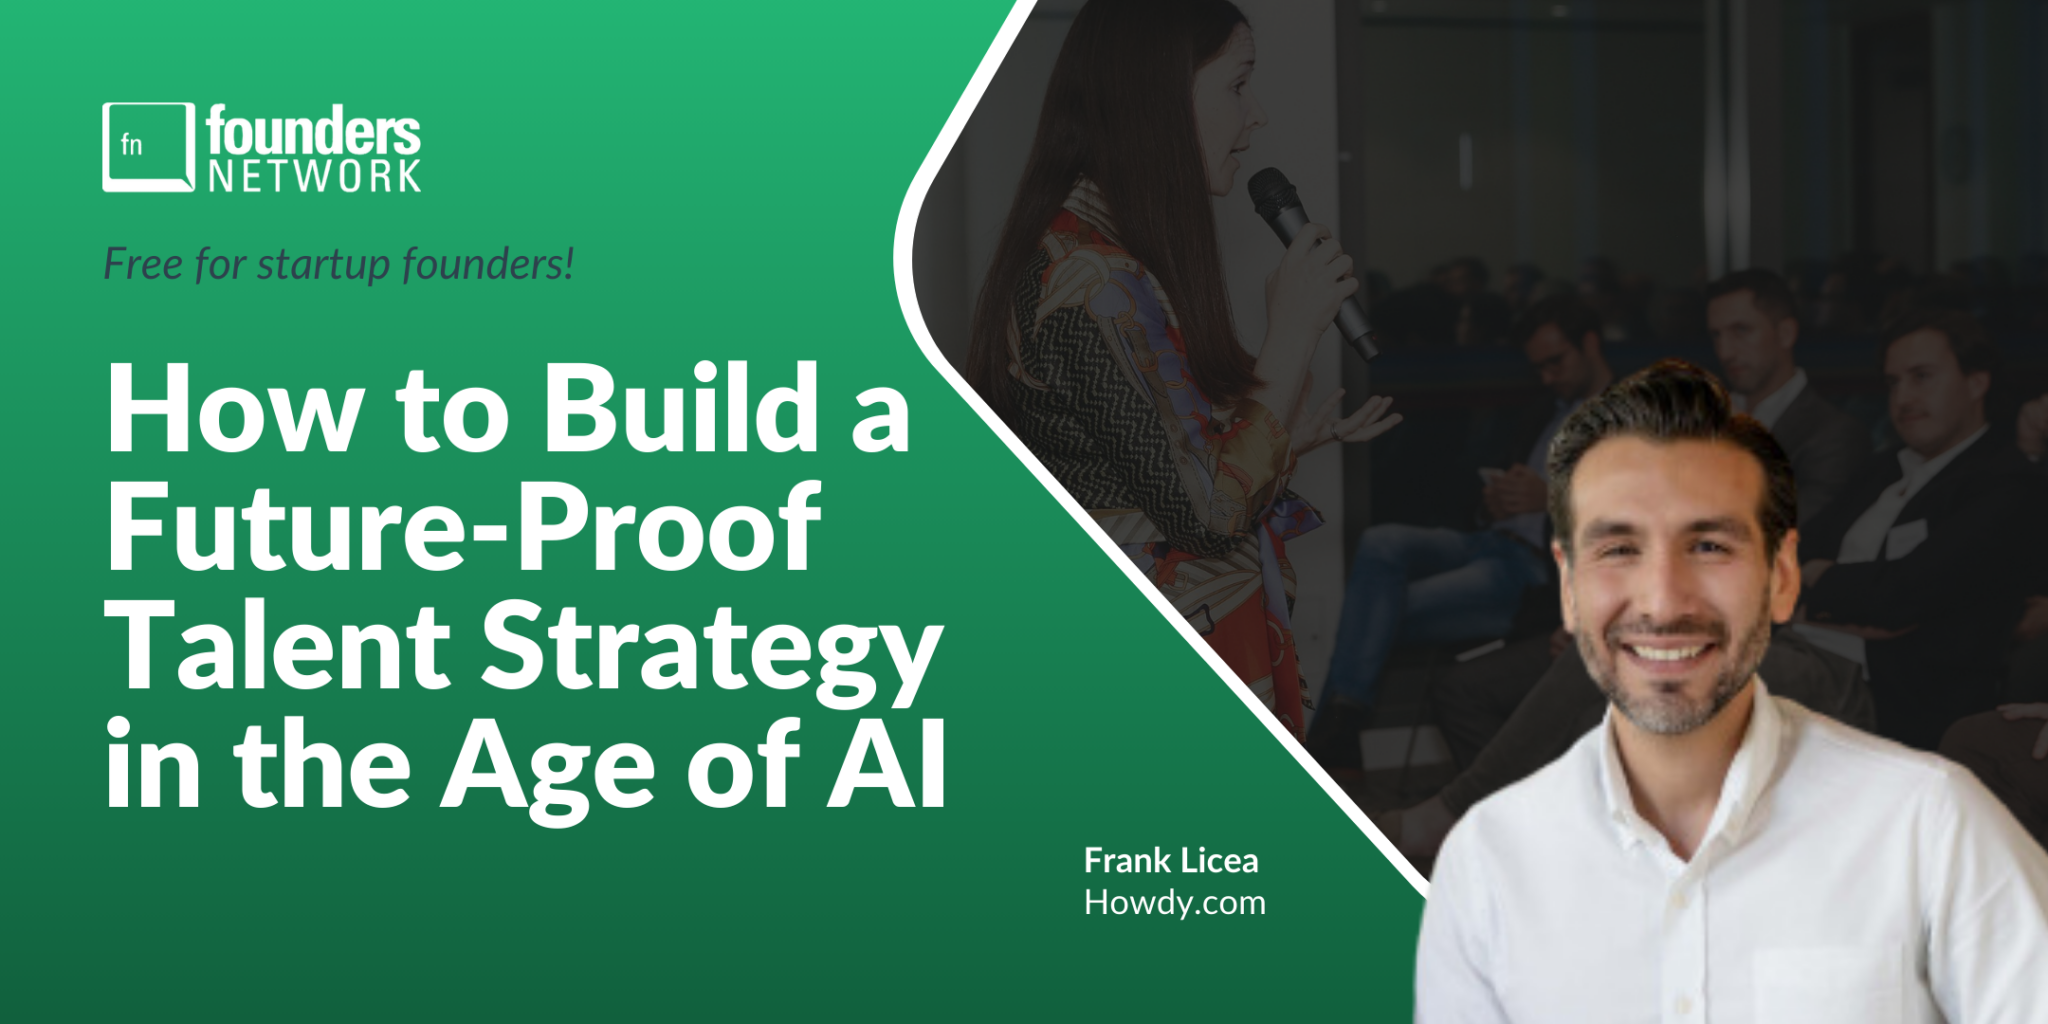 Featured image for “How to Build a Future-Proof Talent Strategy in the Age of AI”